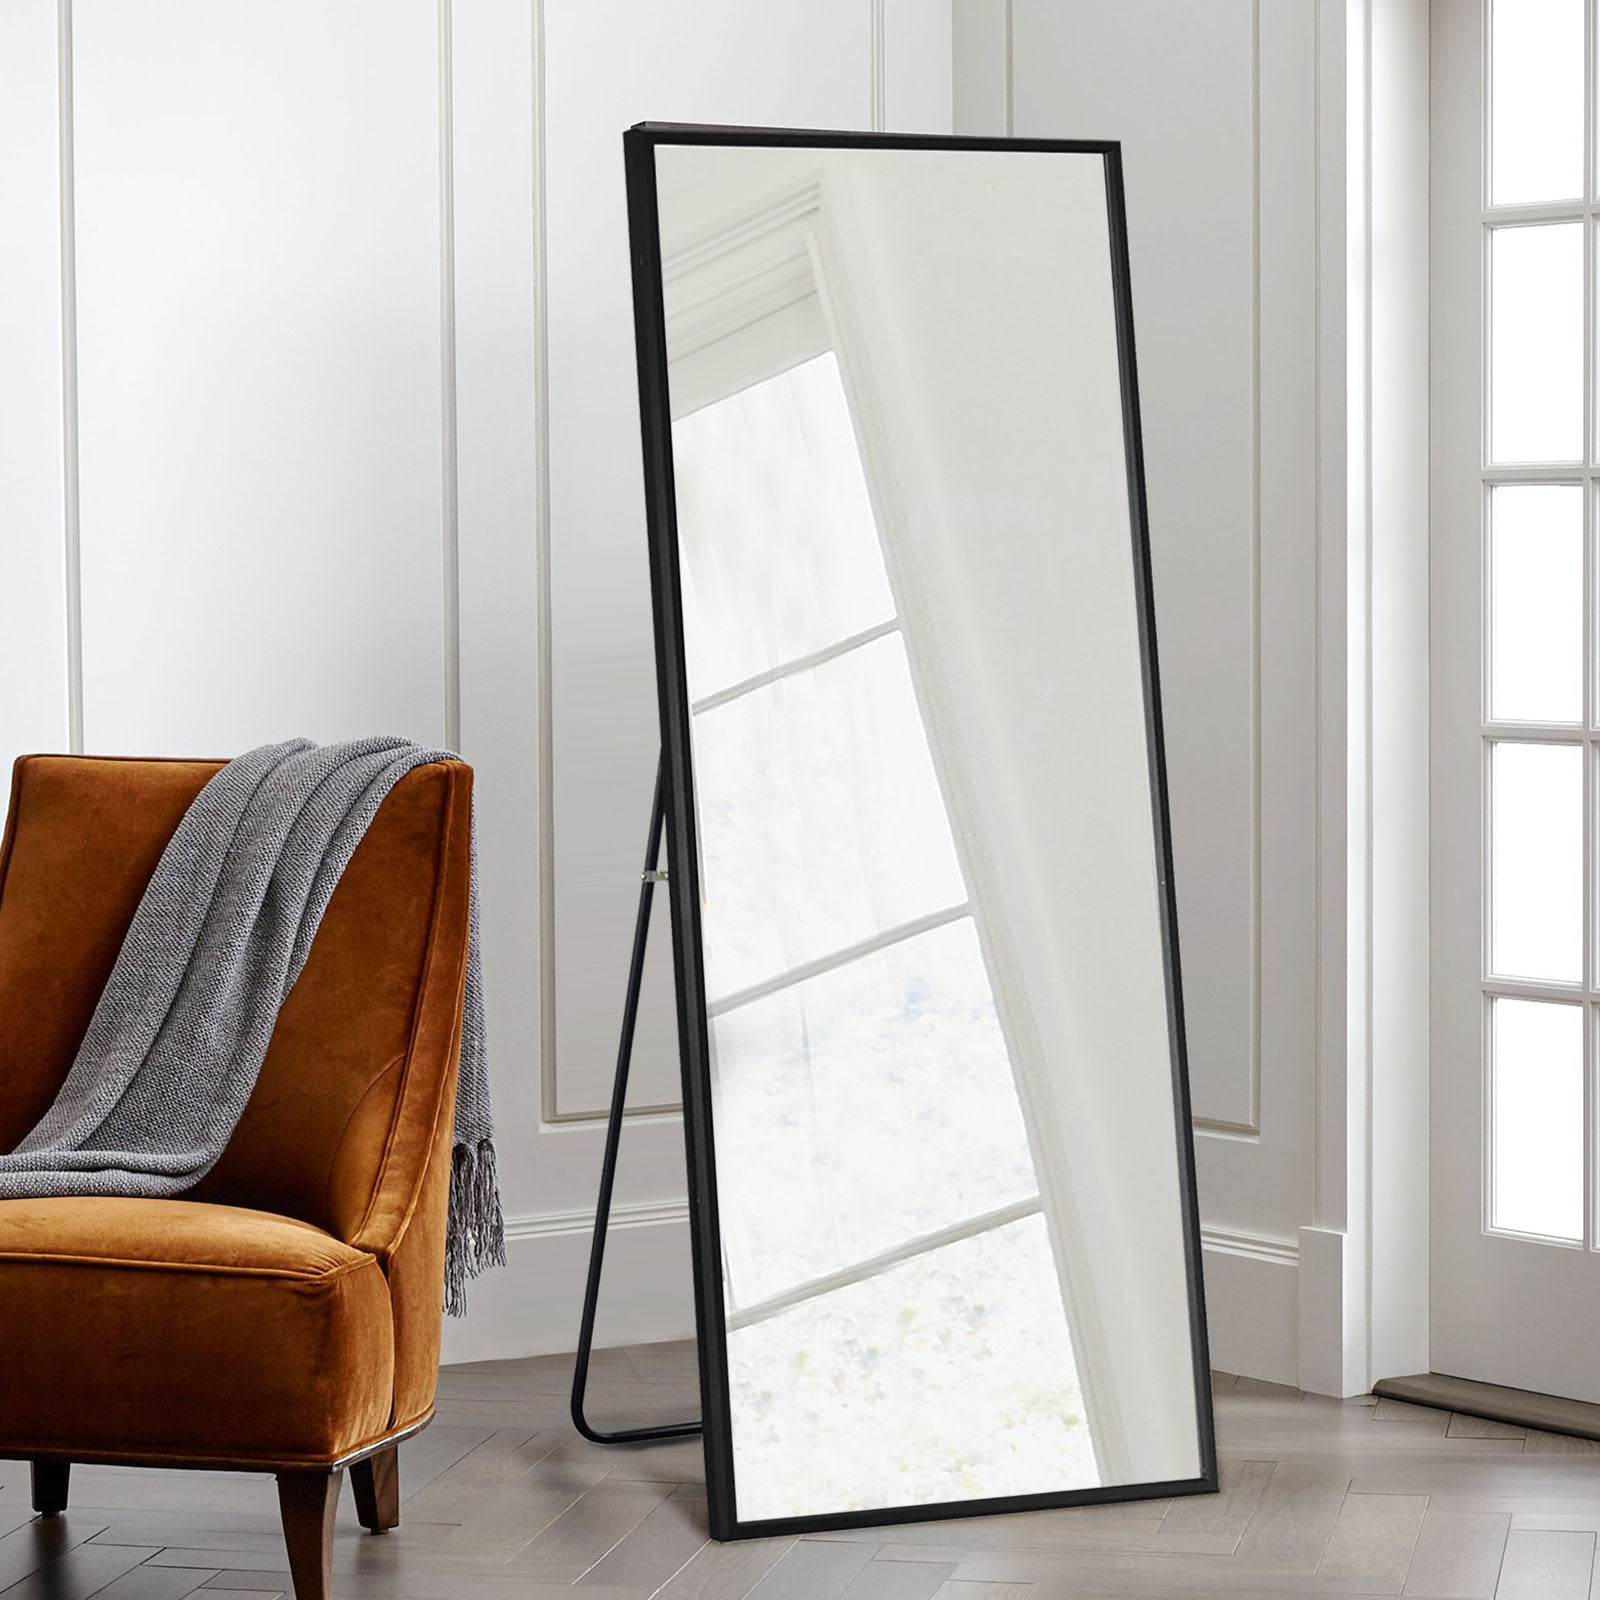 NeuType Full Length Mirror Floor Mirror with Stand Large Wall Mounted